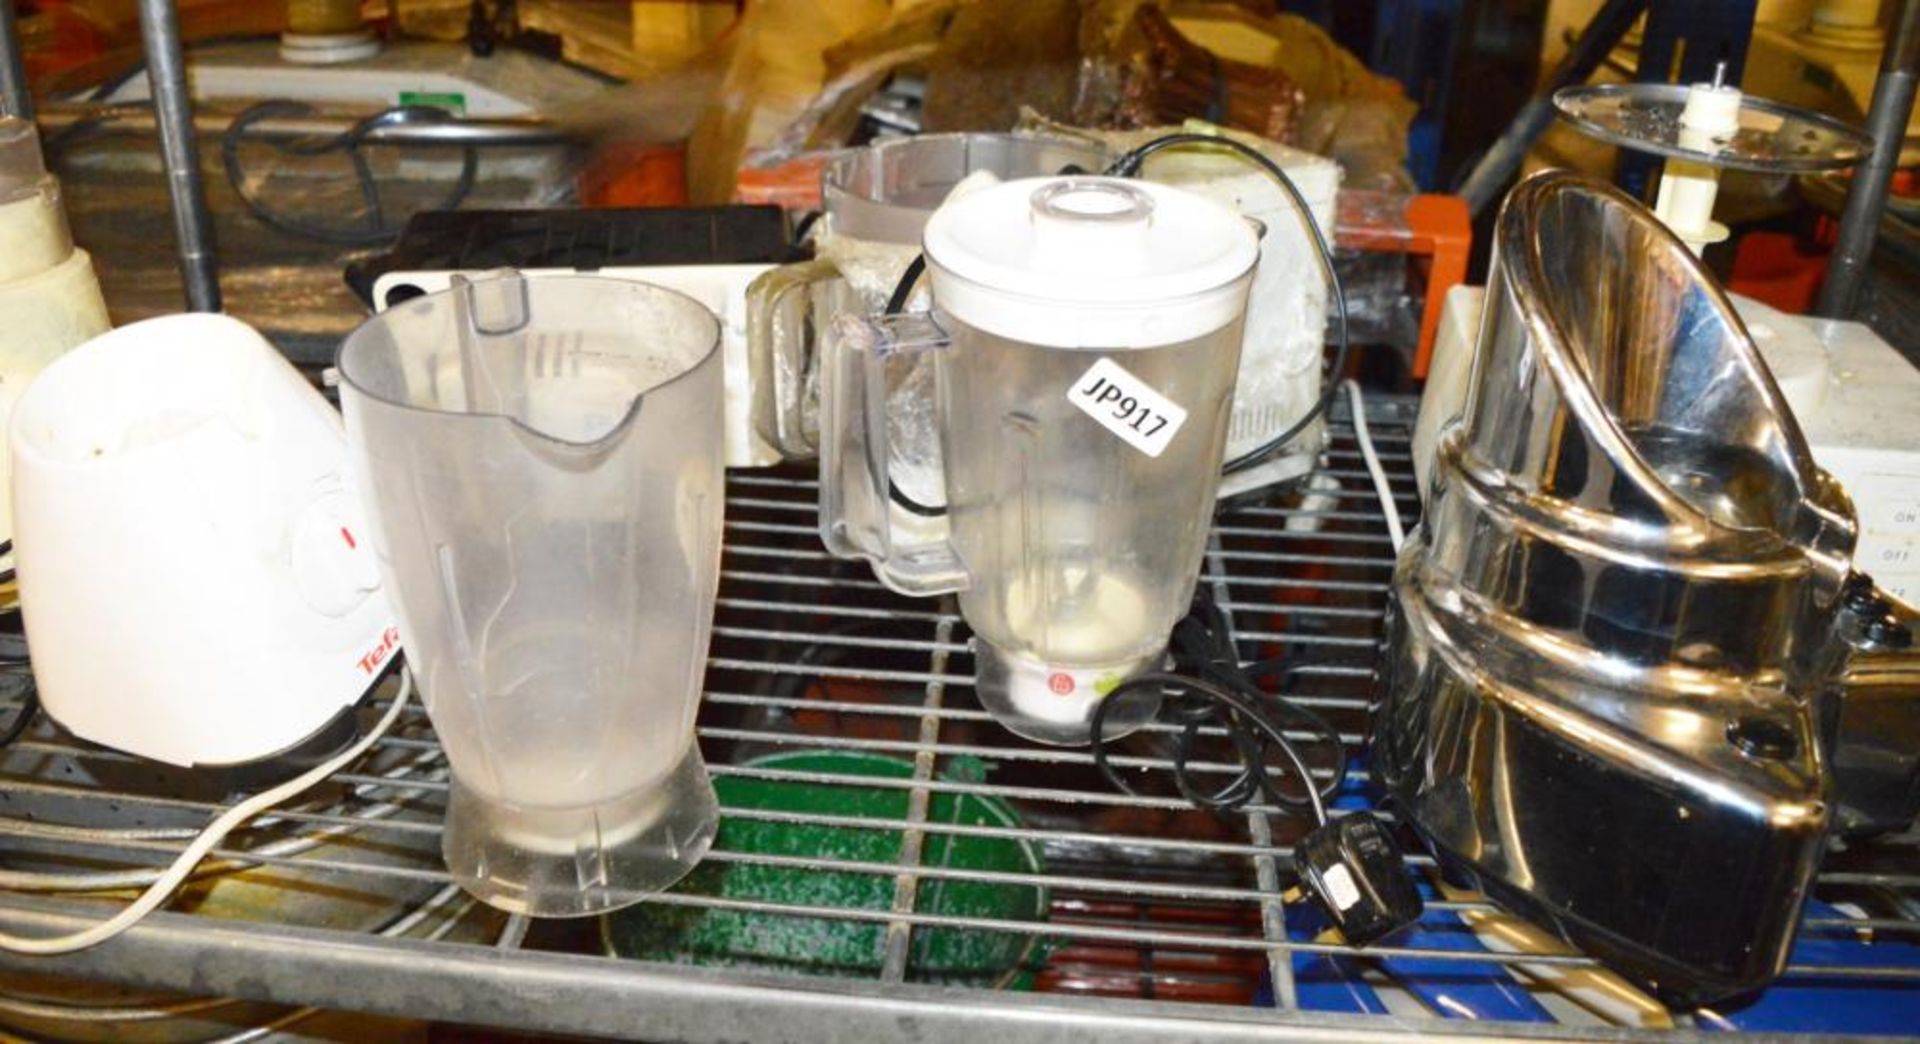 1 x Assorted Collection of Food Blenders and Blending Jugs - CL297 - Ref JP917 - Location: Bolton BL - Image 2 of 7